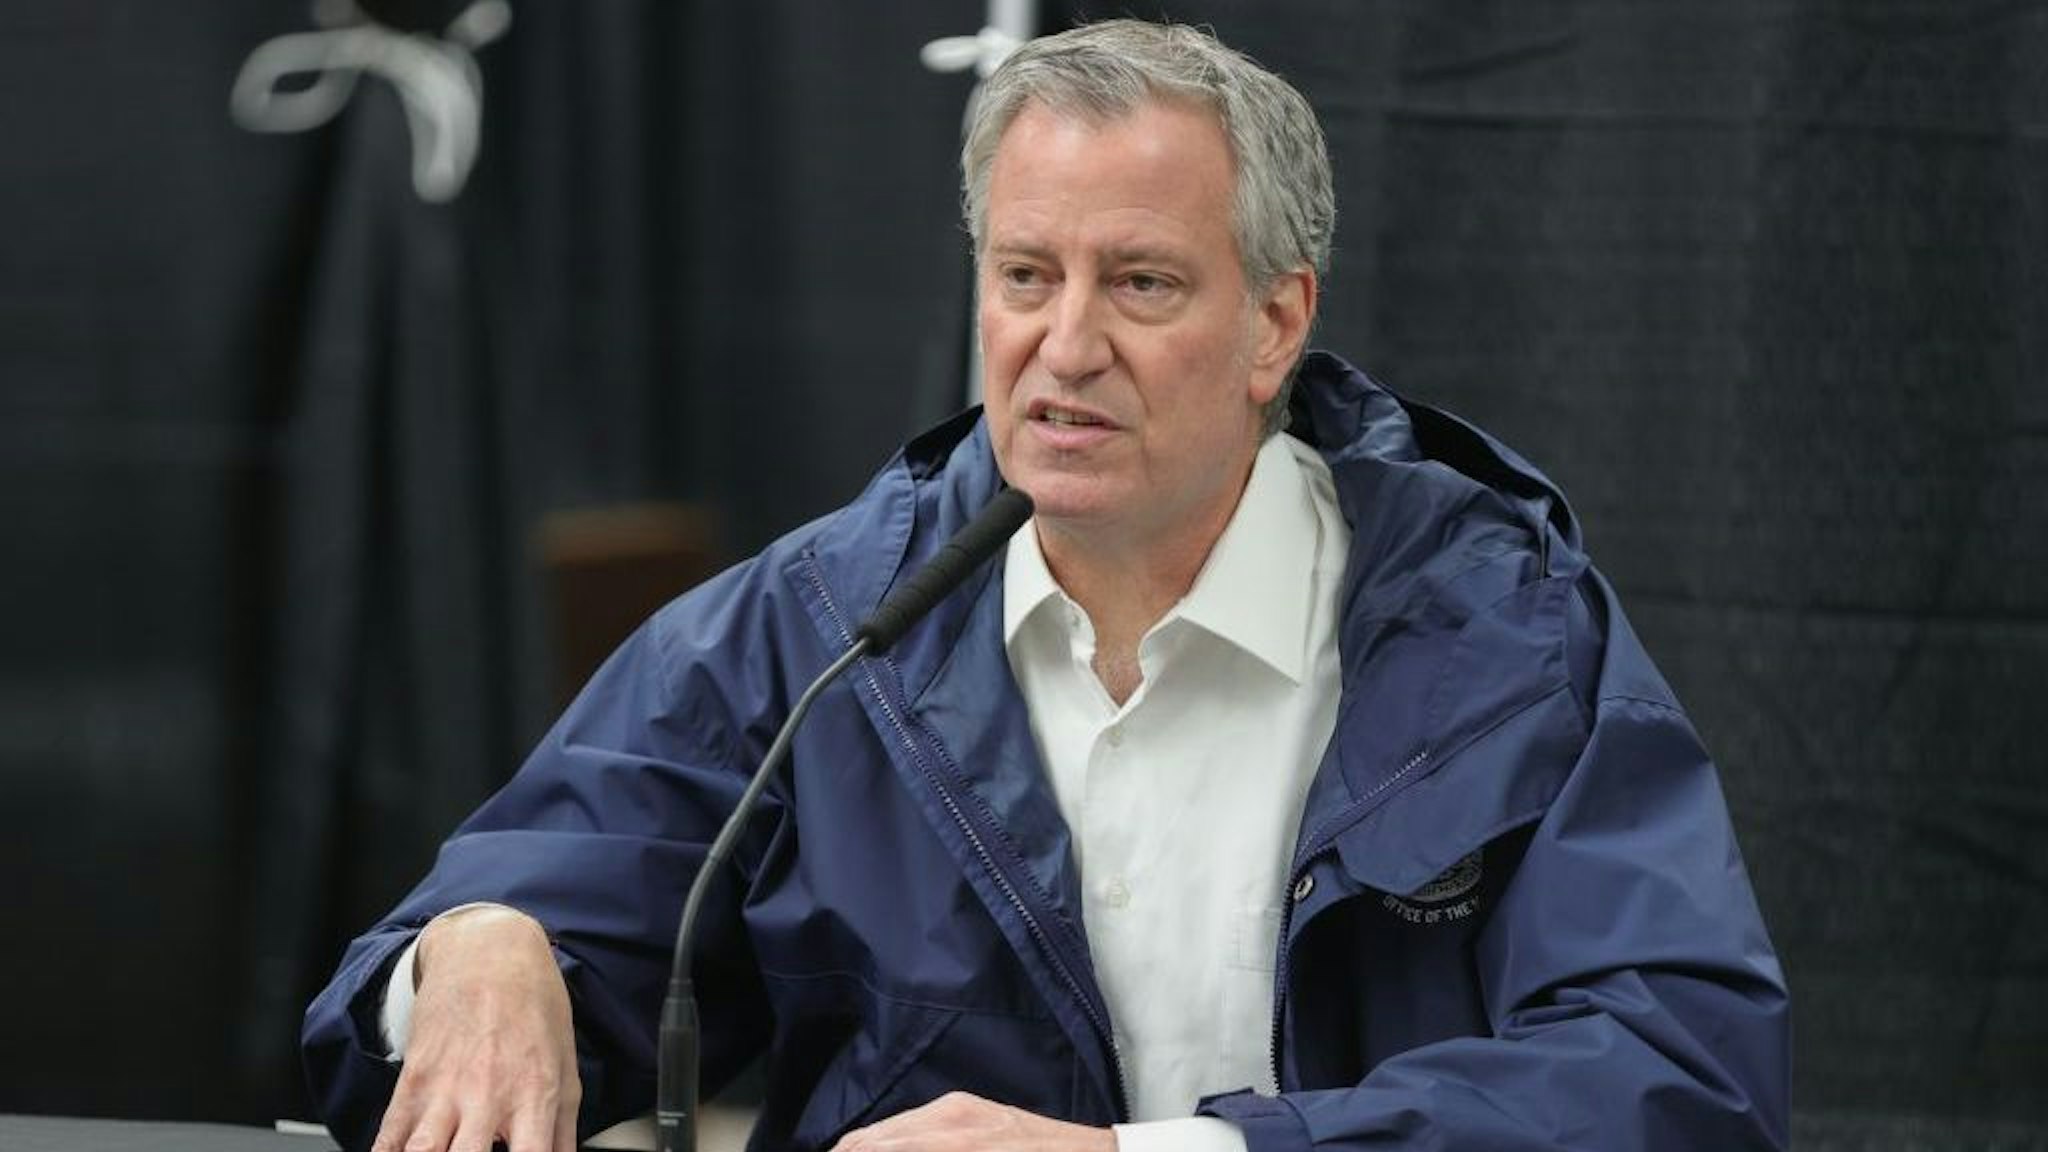 Mayor Bill de Blasio greets healthcare workers and conducts a press conference at the USTA Billie Jean King National Tennis Center, New York, April 10, 2020. The Tennis Center was transformed into a temporary hospital to treat patients with the COVID-19 coronavirus. (Photo by EuropaNewswire/Gado/Getty Images)